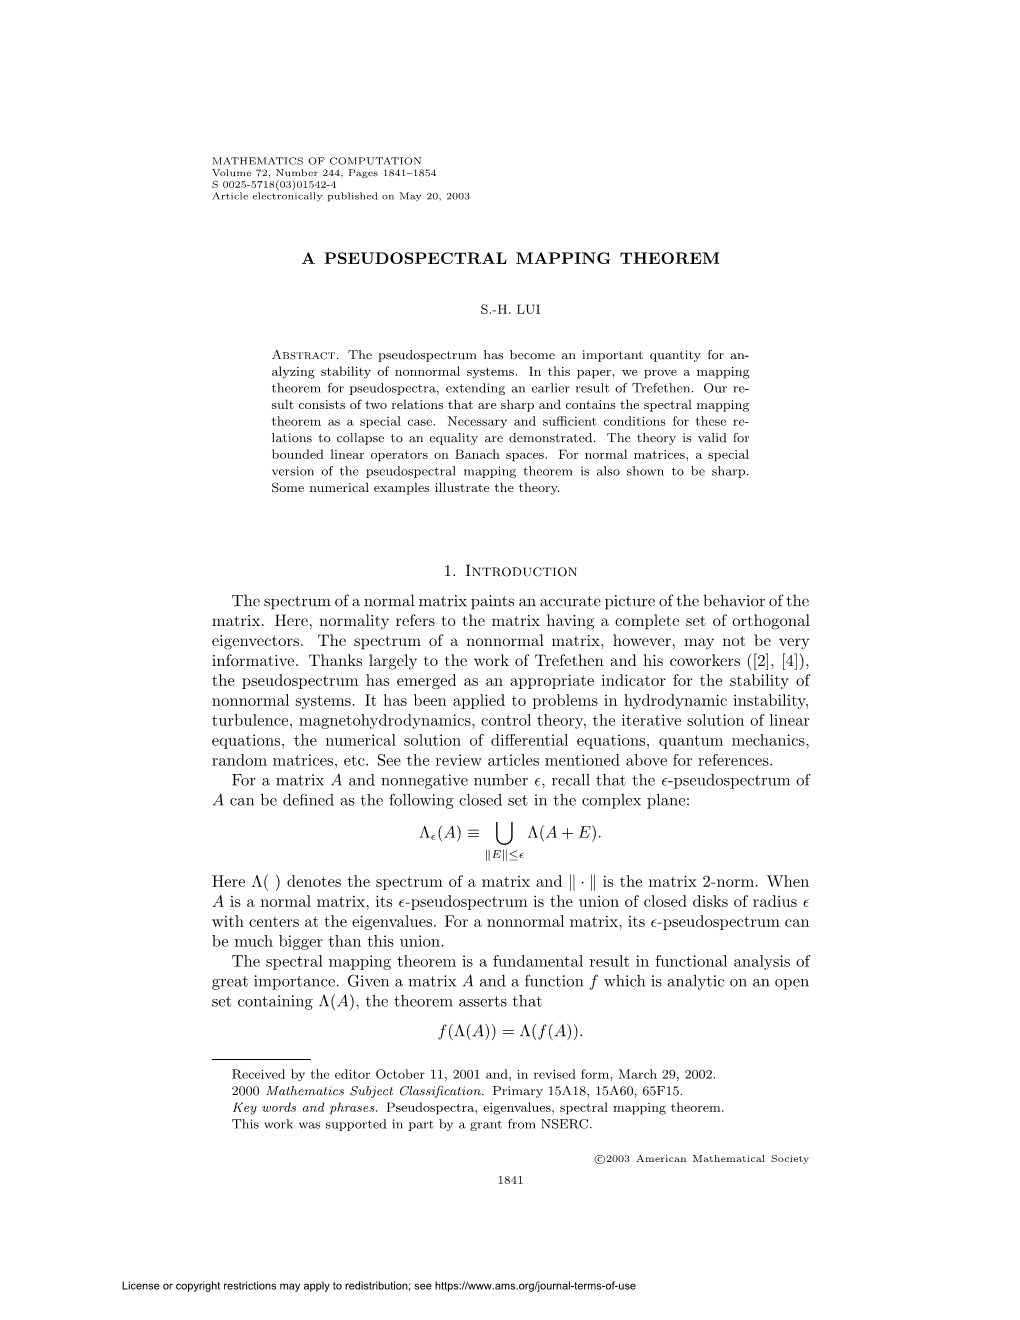 A PSEUDOSPECTRAL MAPPING THEOREM 1. Introduction The